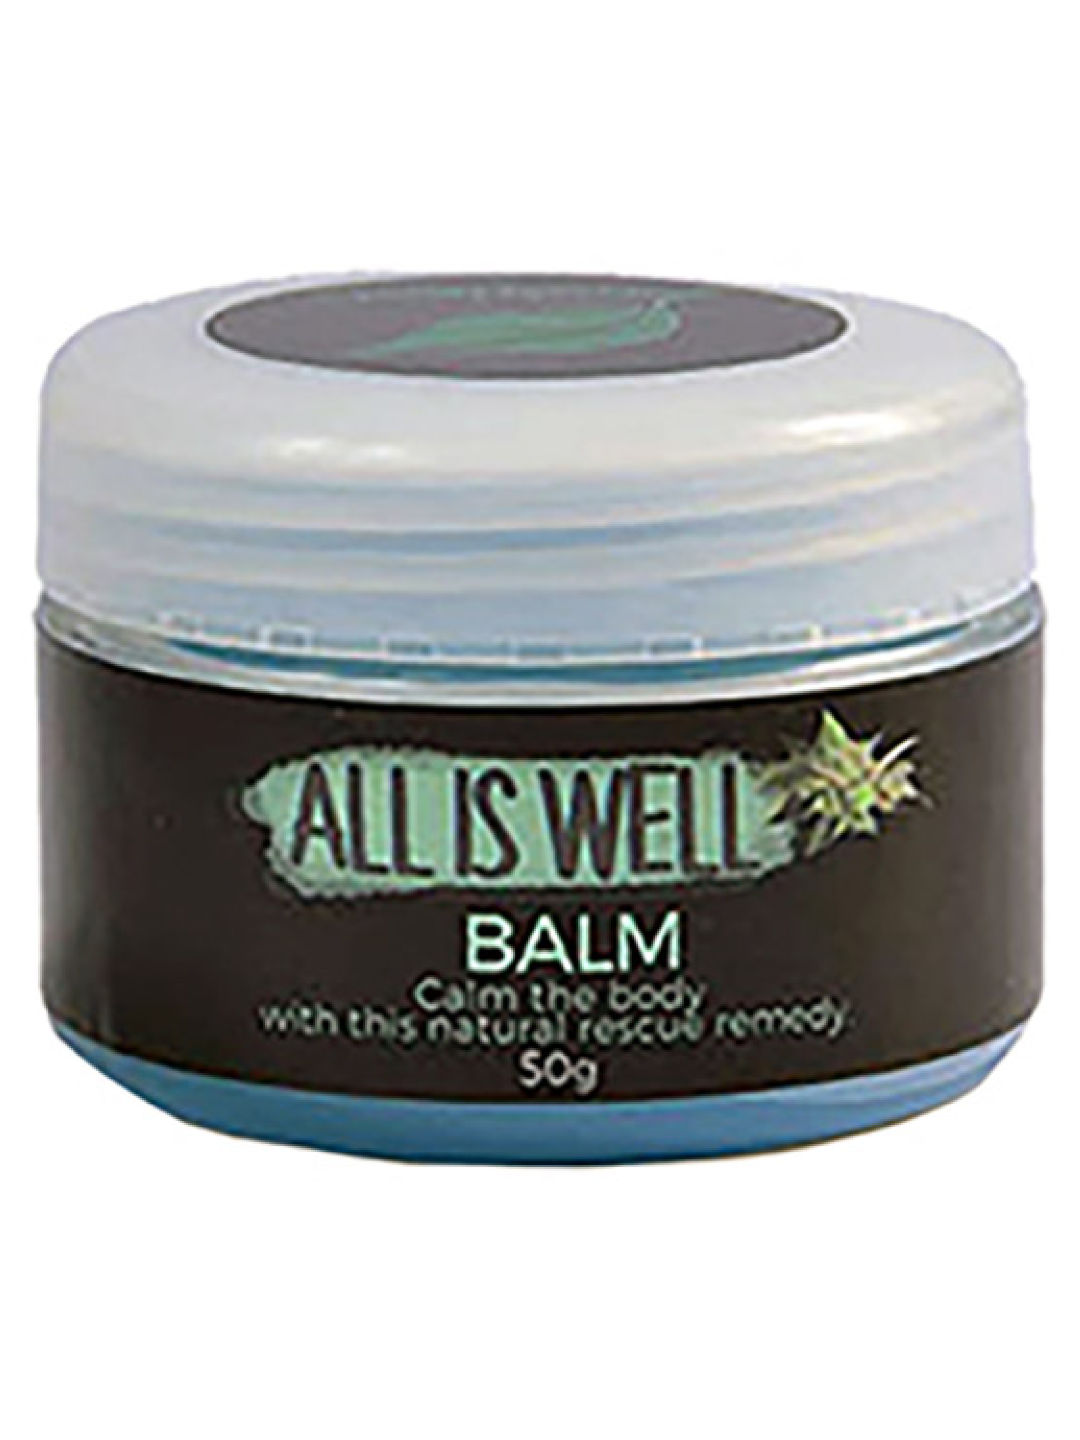 Zenutrients All is Well Balm (50g) (No Color- Image 1)